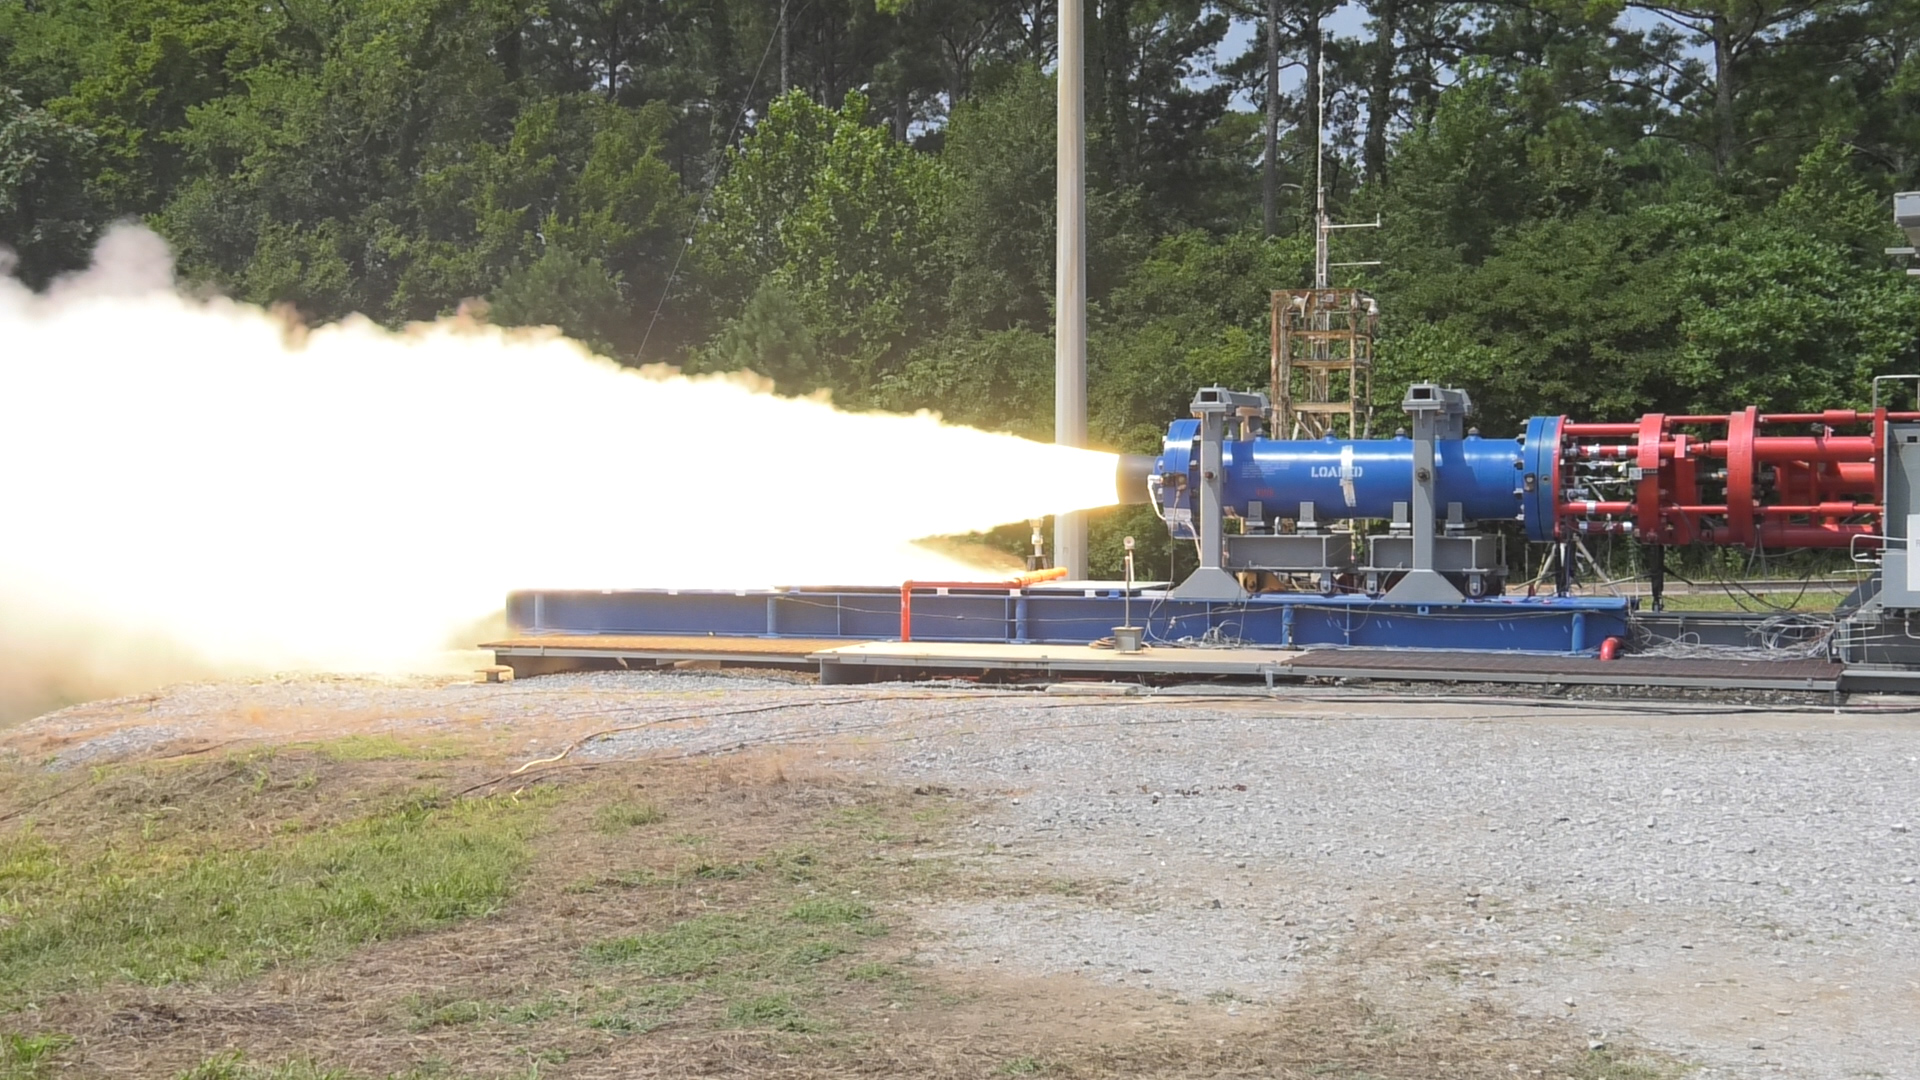 A test firing on Aug. 6 will help engineers evaluate a new cleaning solvent for Space Launch System (SLS) booster nozzles.